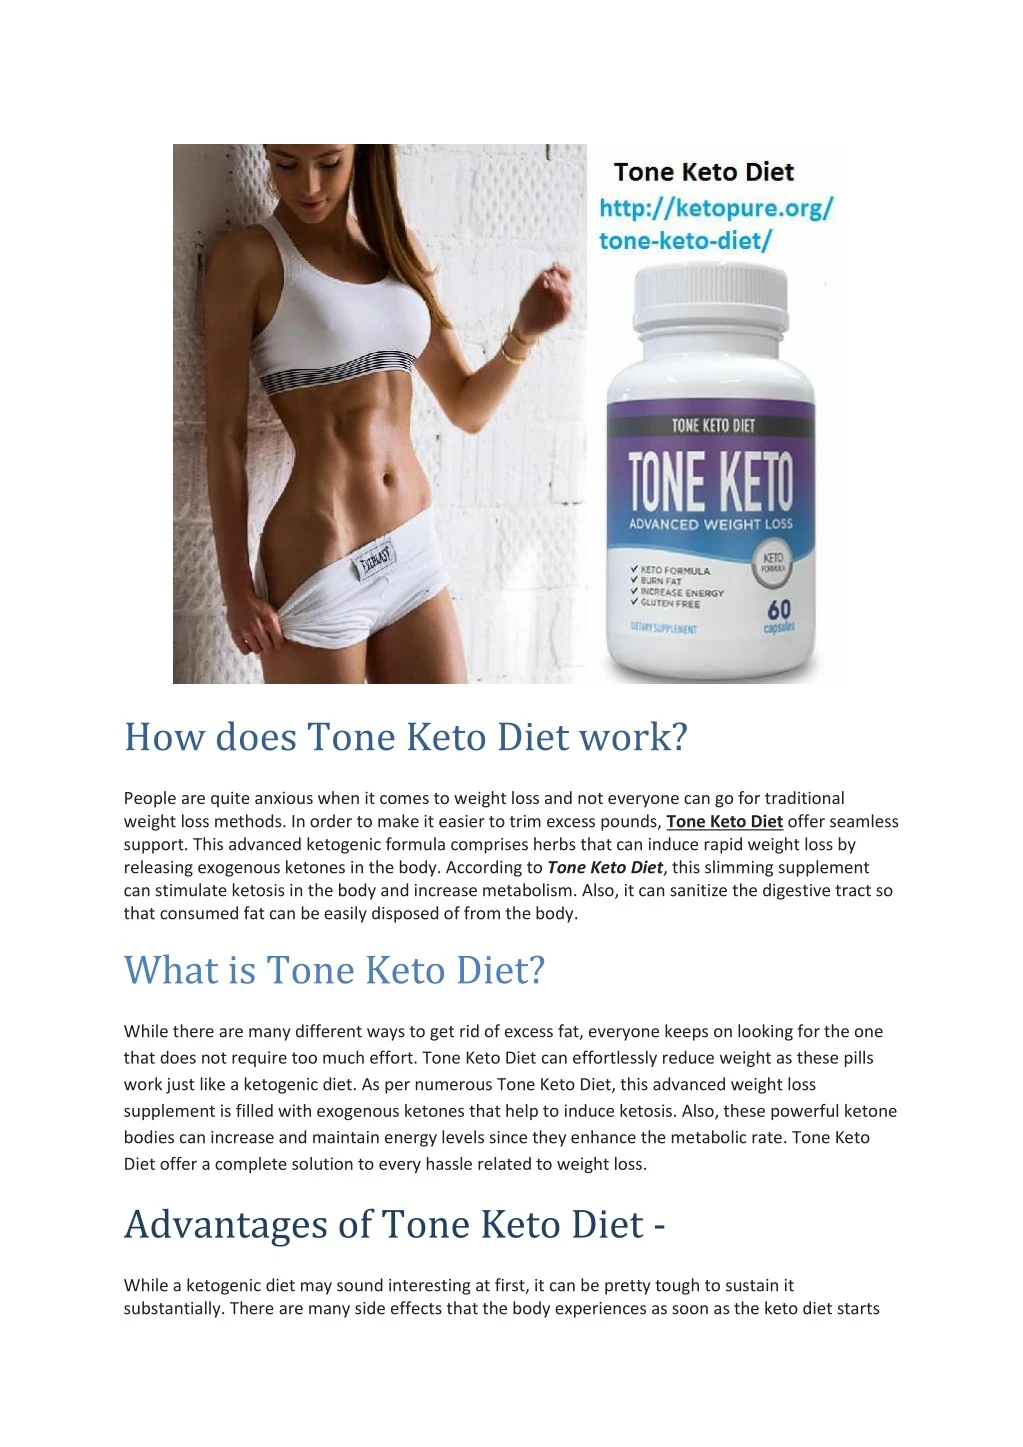 how does tone keto diet work